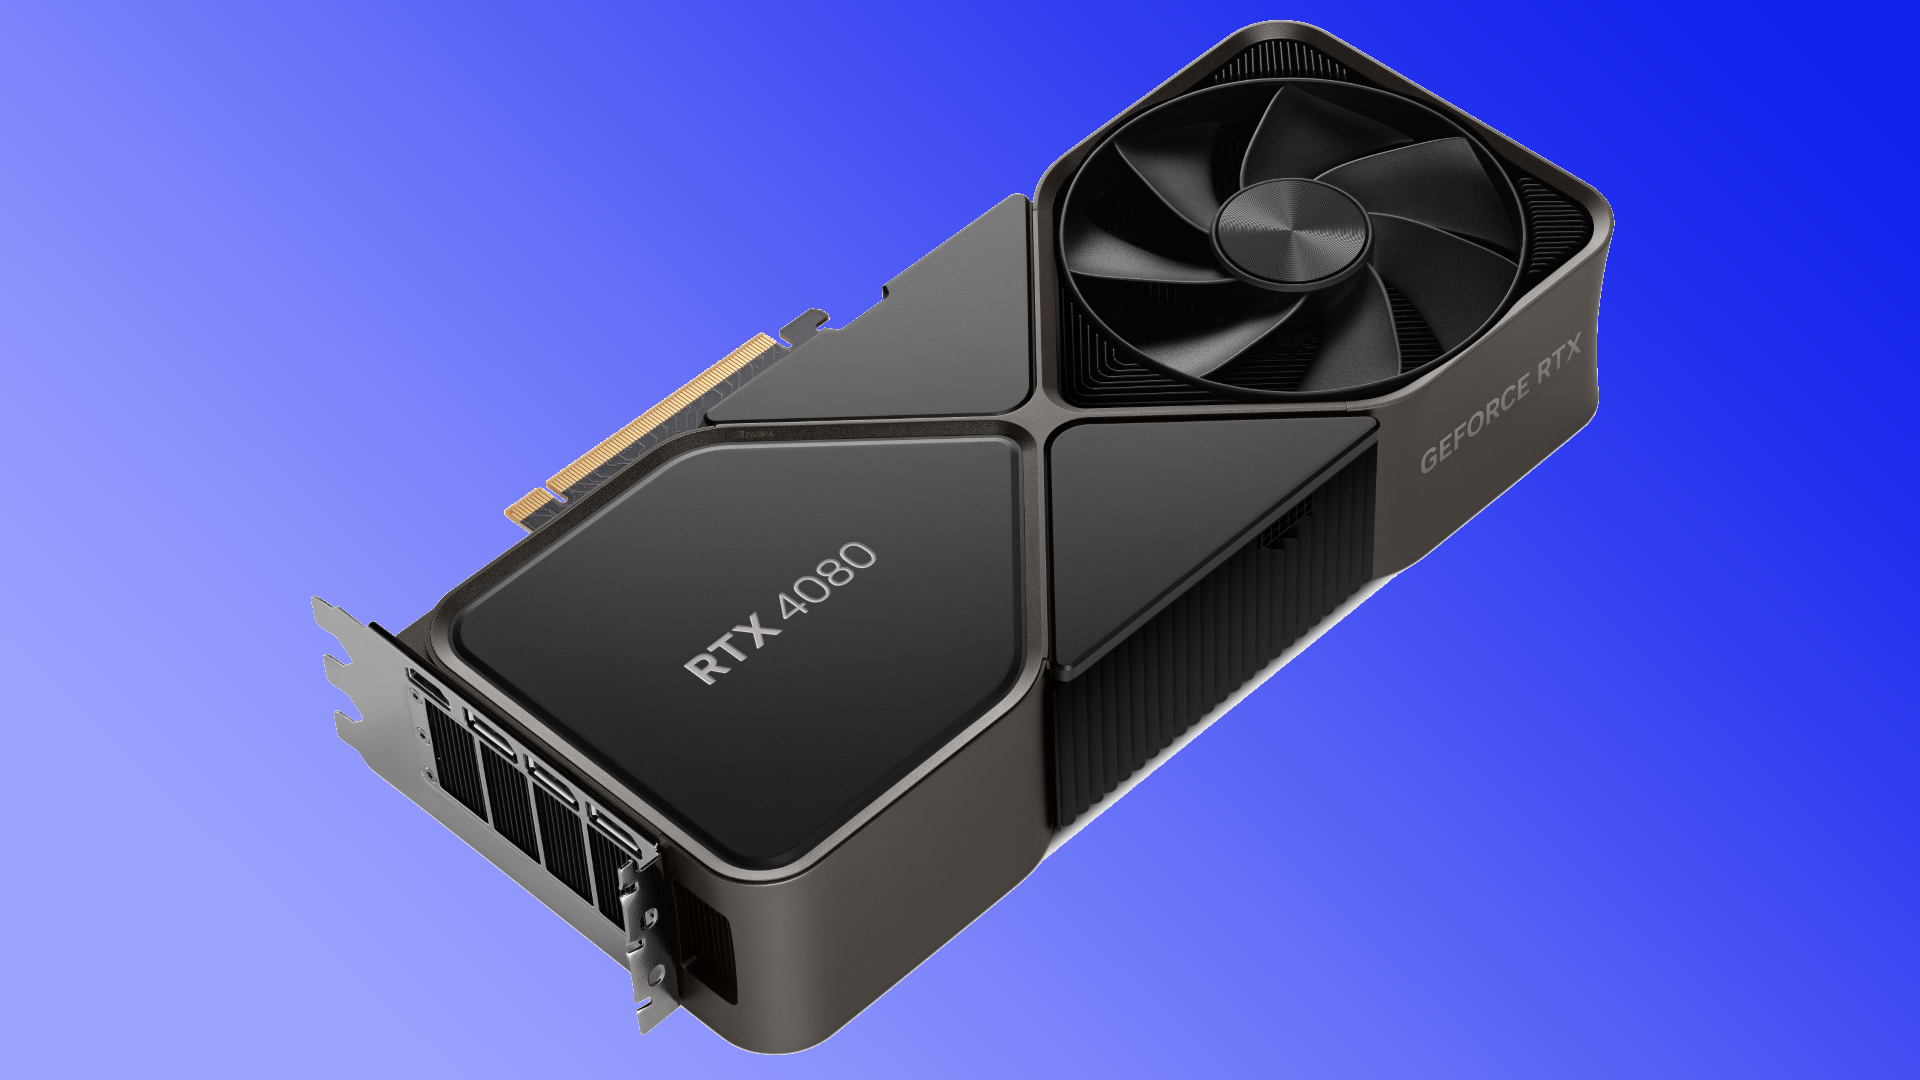 NVIDIA GeForce RTX 4080 tops the sales chart